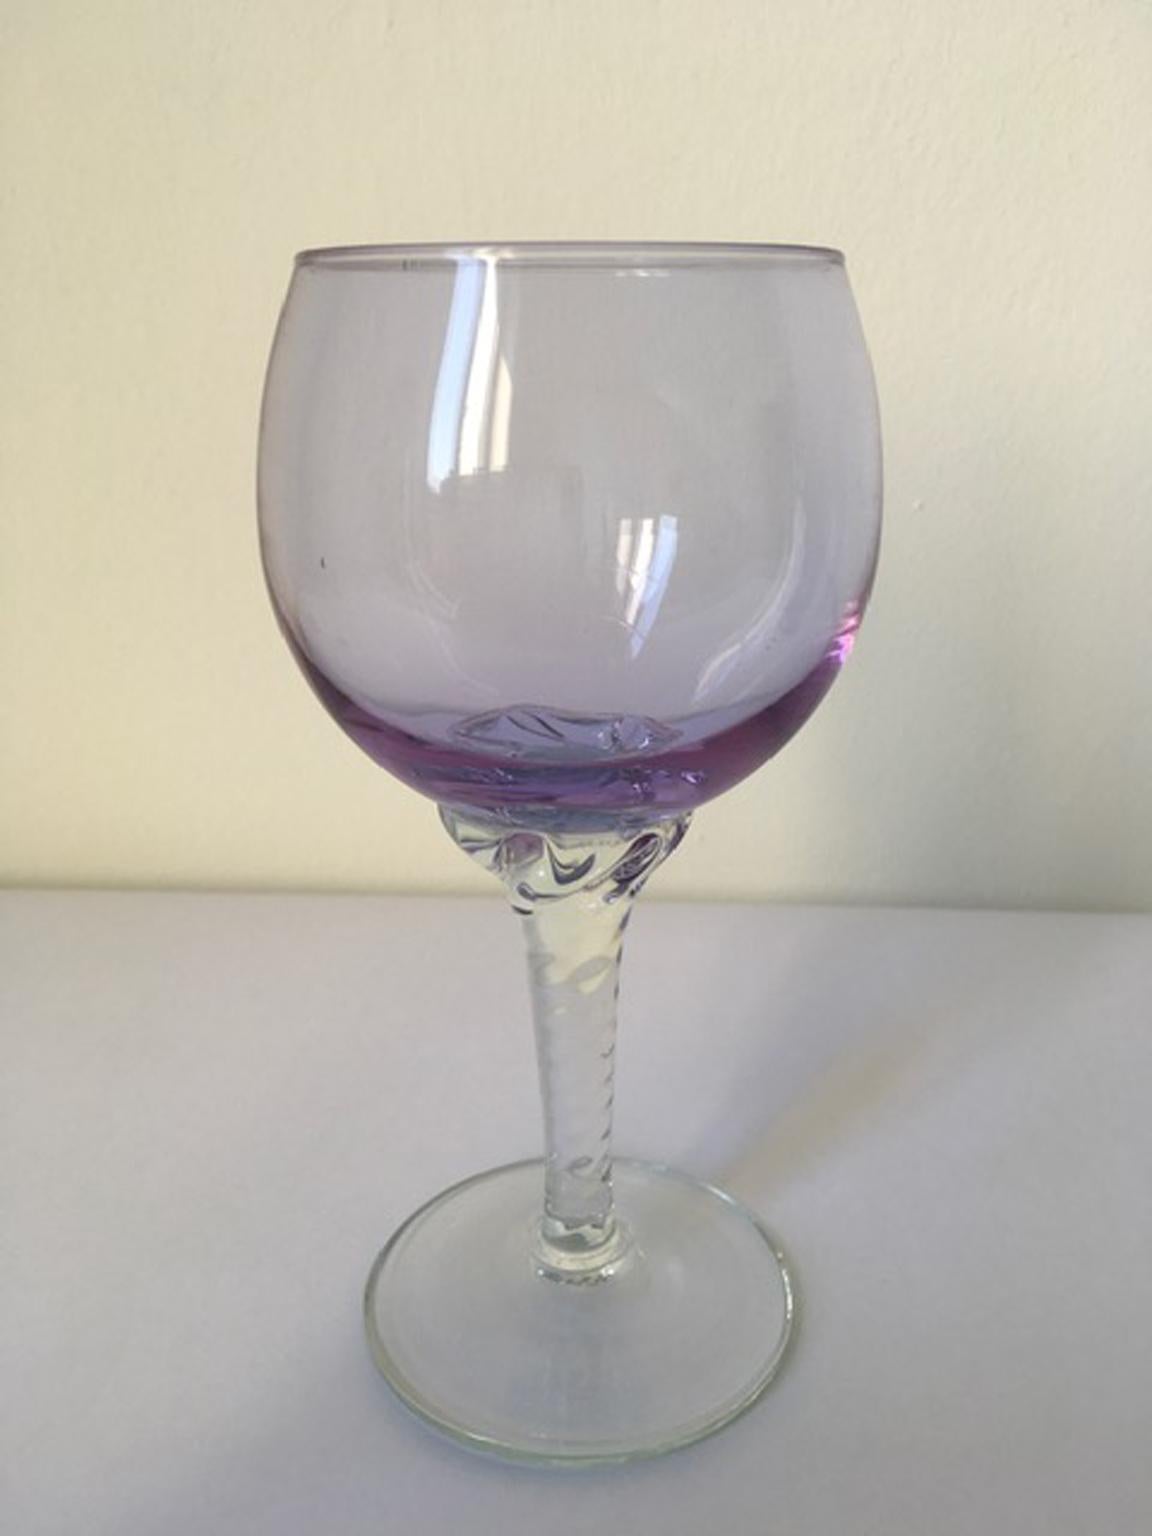 This is an elegant goblet hand made in Murano, Venice in 1960 in Murano blown glass. The piece is very charming and on it are visible the signs of the handwork.
The foot is in clear blown glass and the cup has a vibrant color, the purple